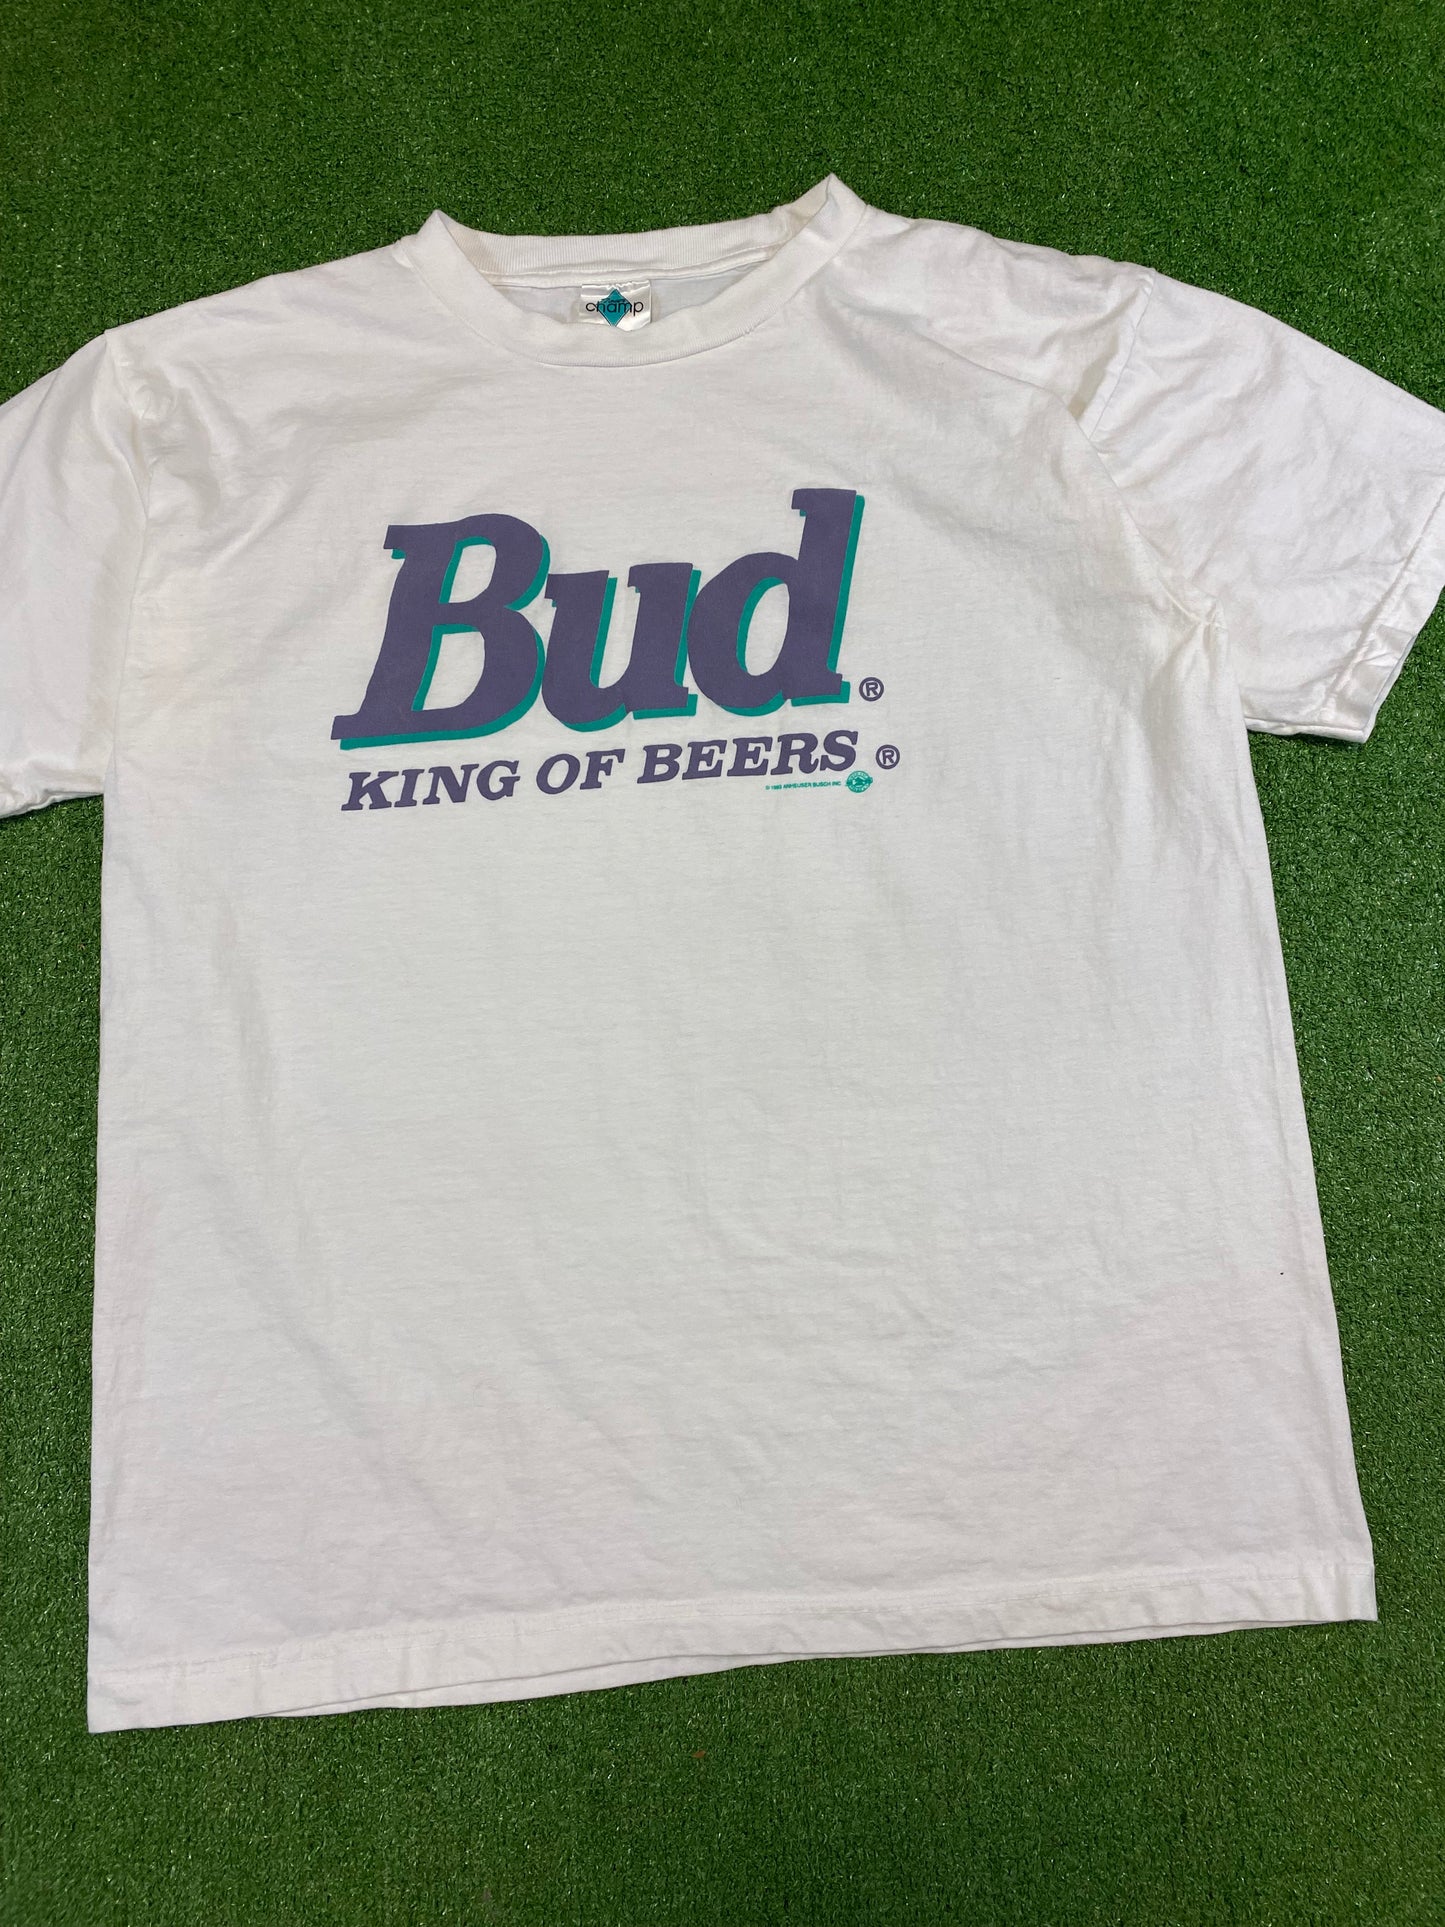 1993 Bud King of Beers Anheuser T-Shirt XL